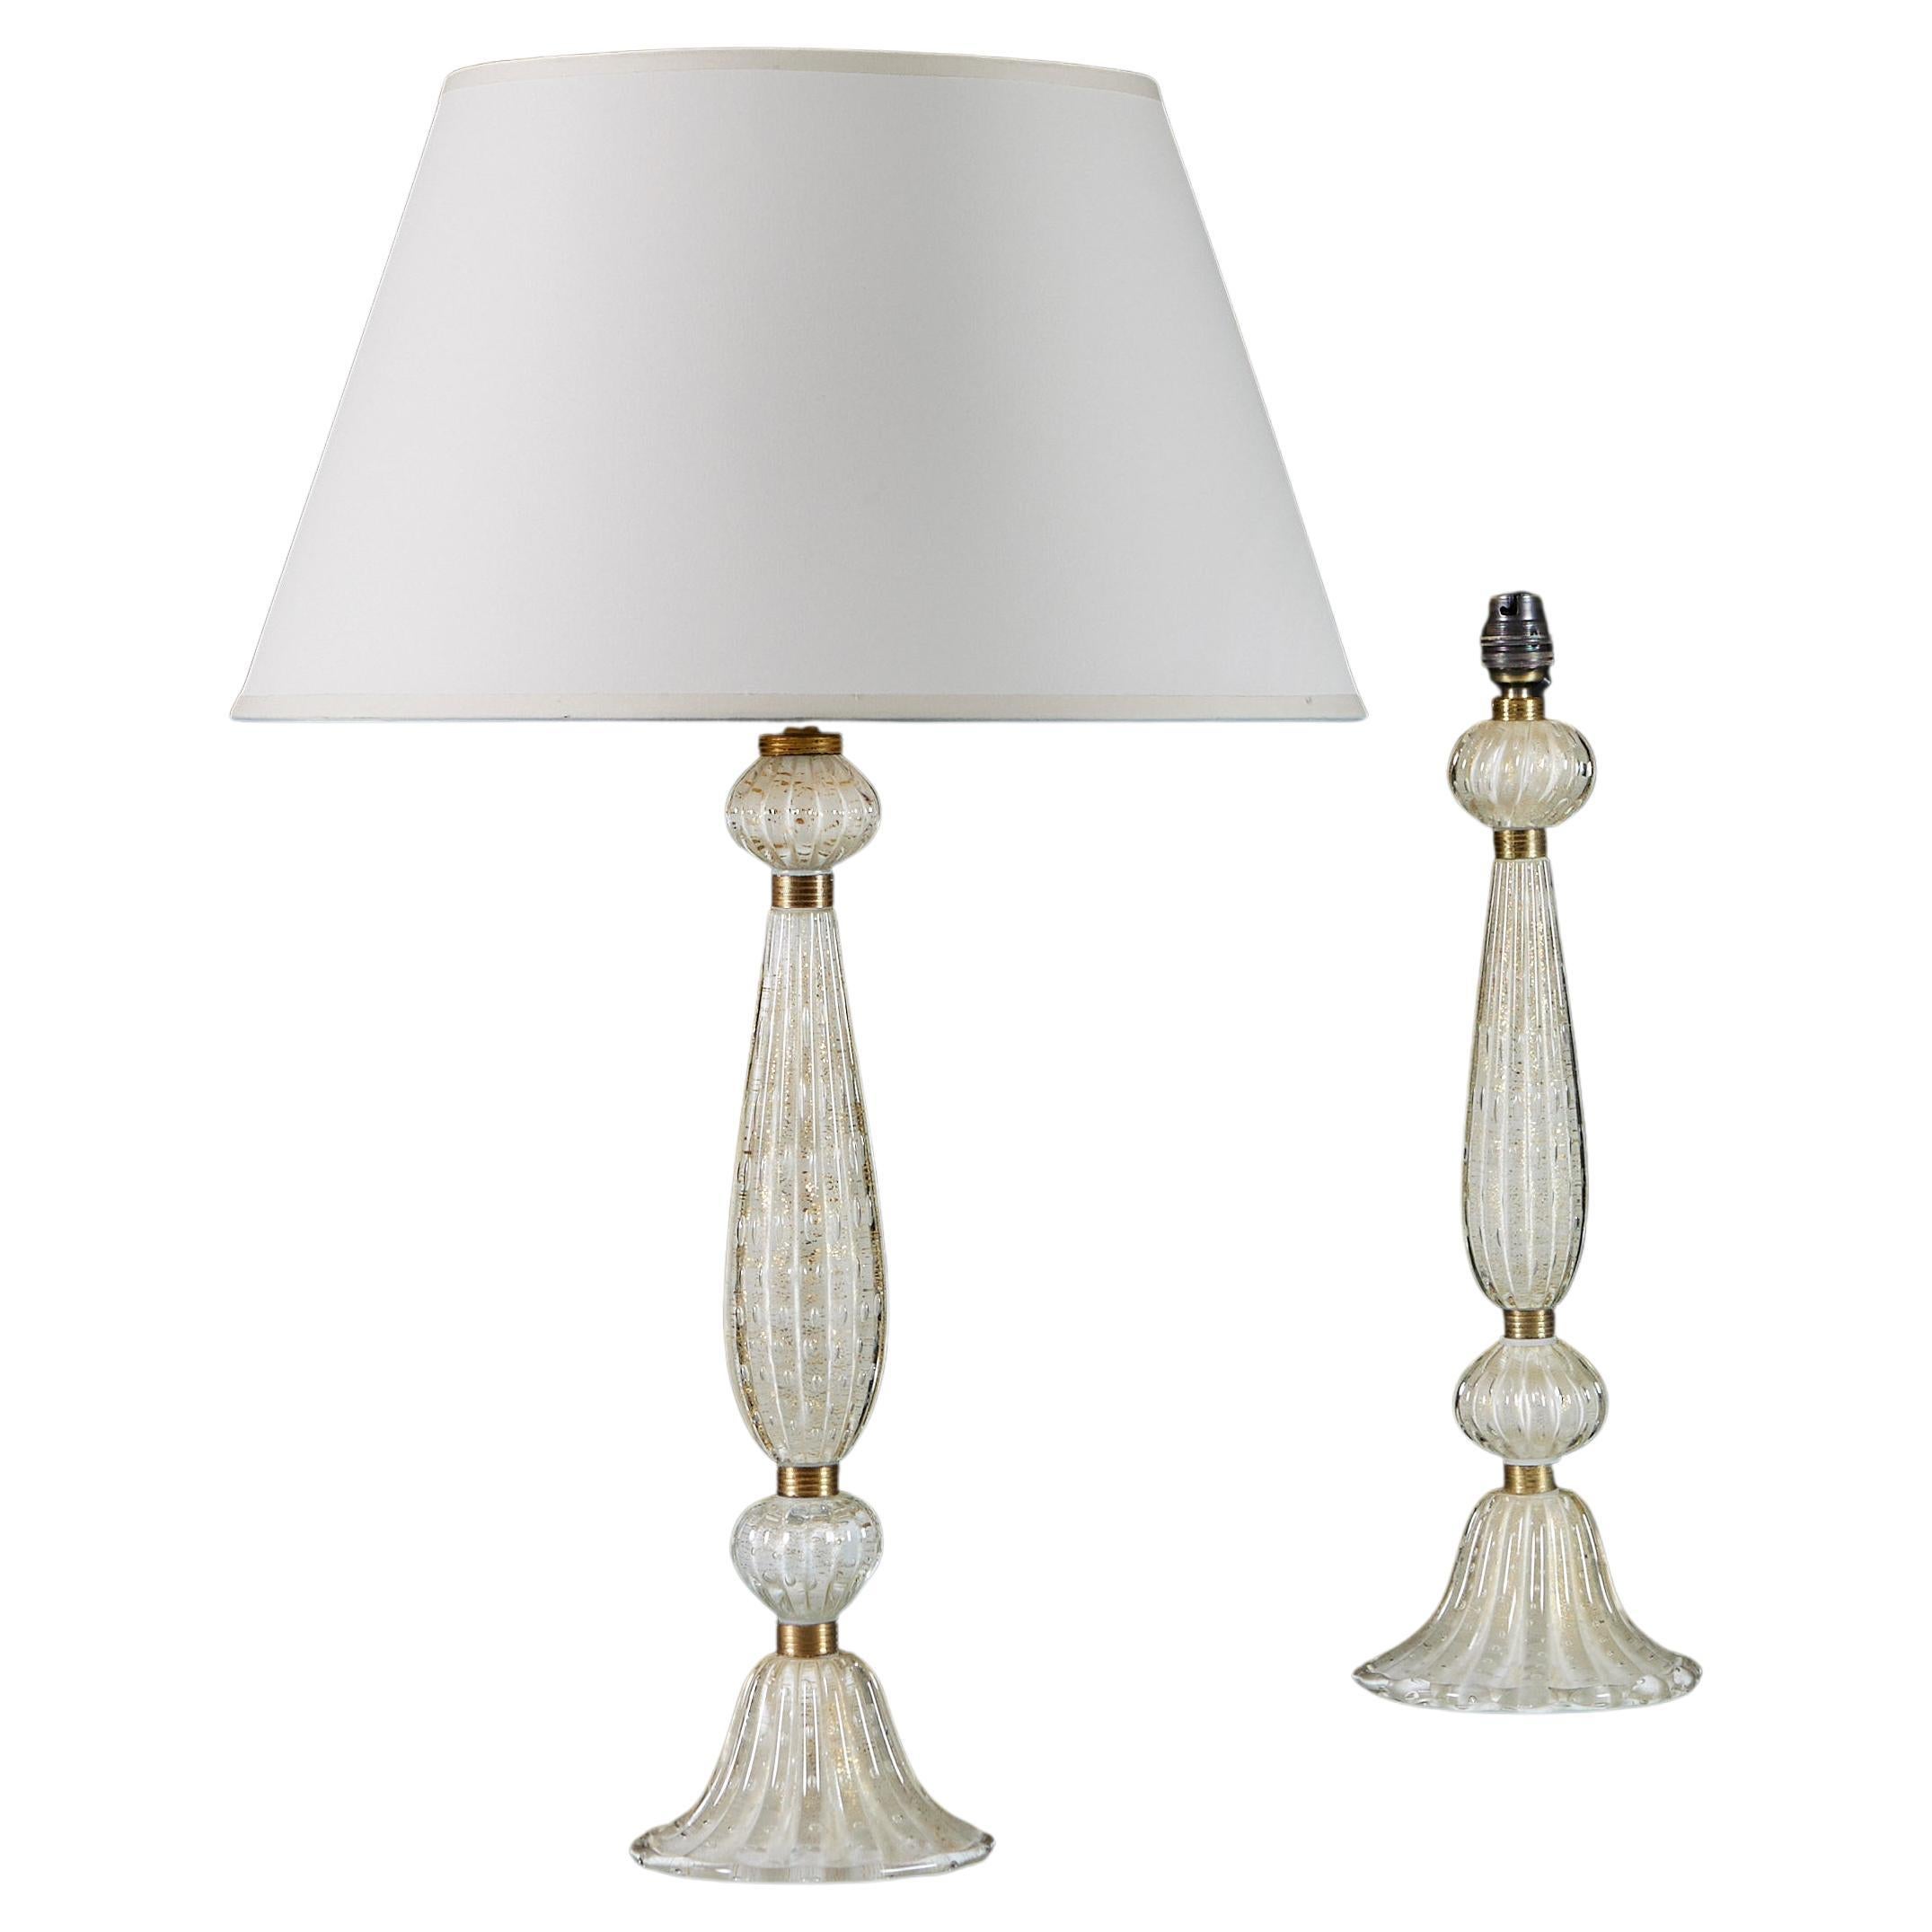 A Pair of Barovier and Toso Gold Murano Glass Lamps 